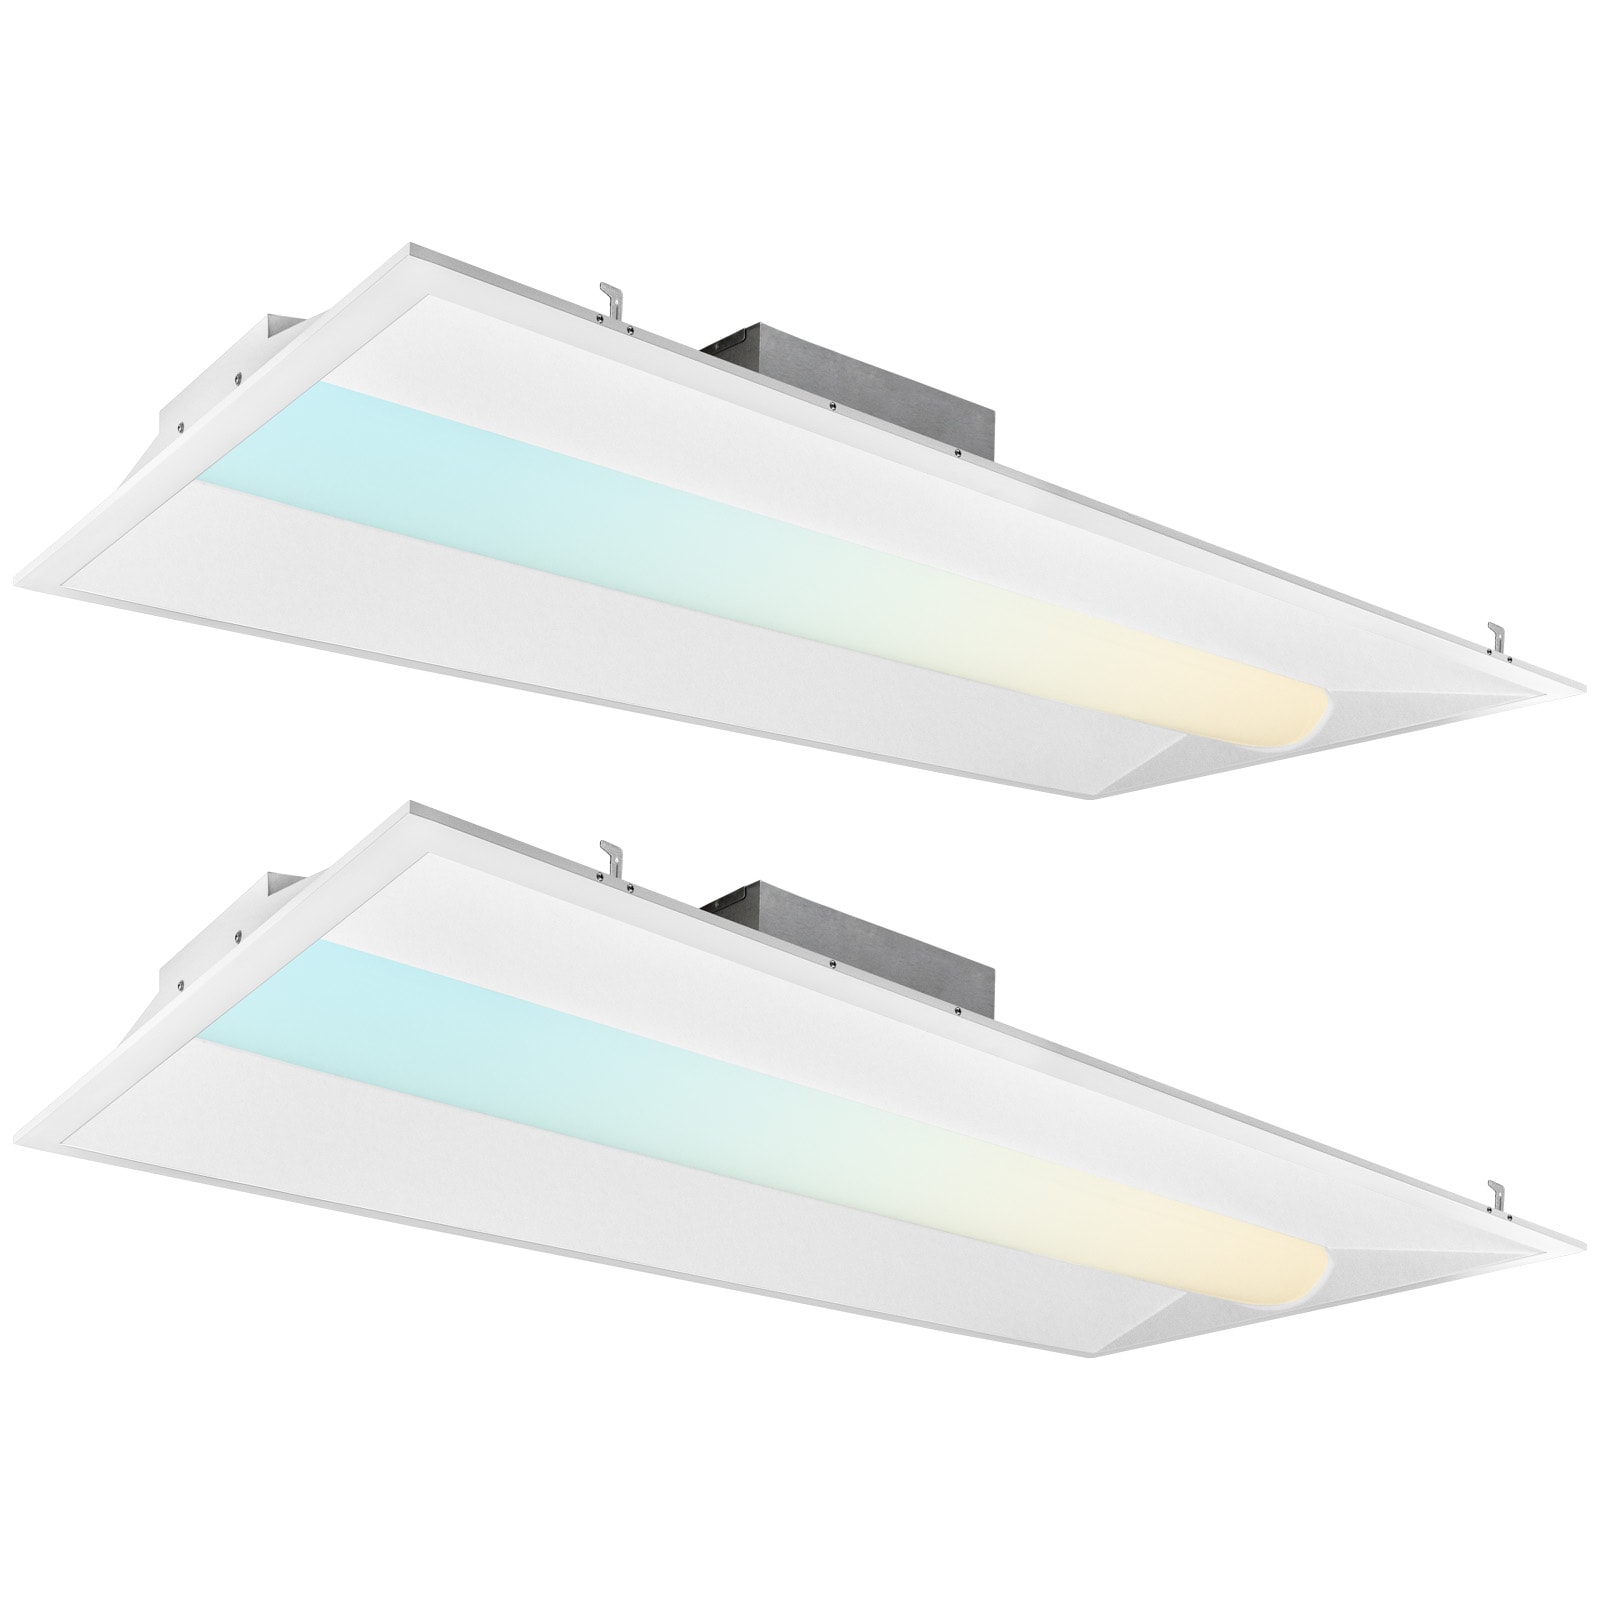 Luxrite 2-Pack 4-ft x 2-ft Adjustable Lumens Tunable White LED Panel Light the LED Panel Lights department at Lowes.com